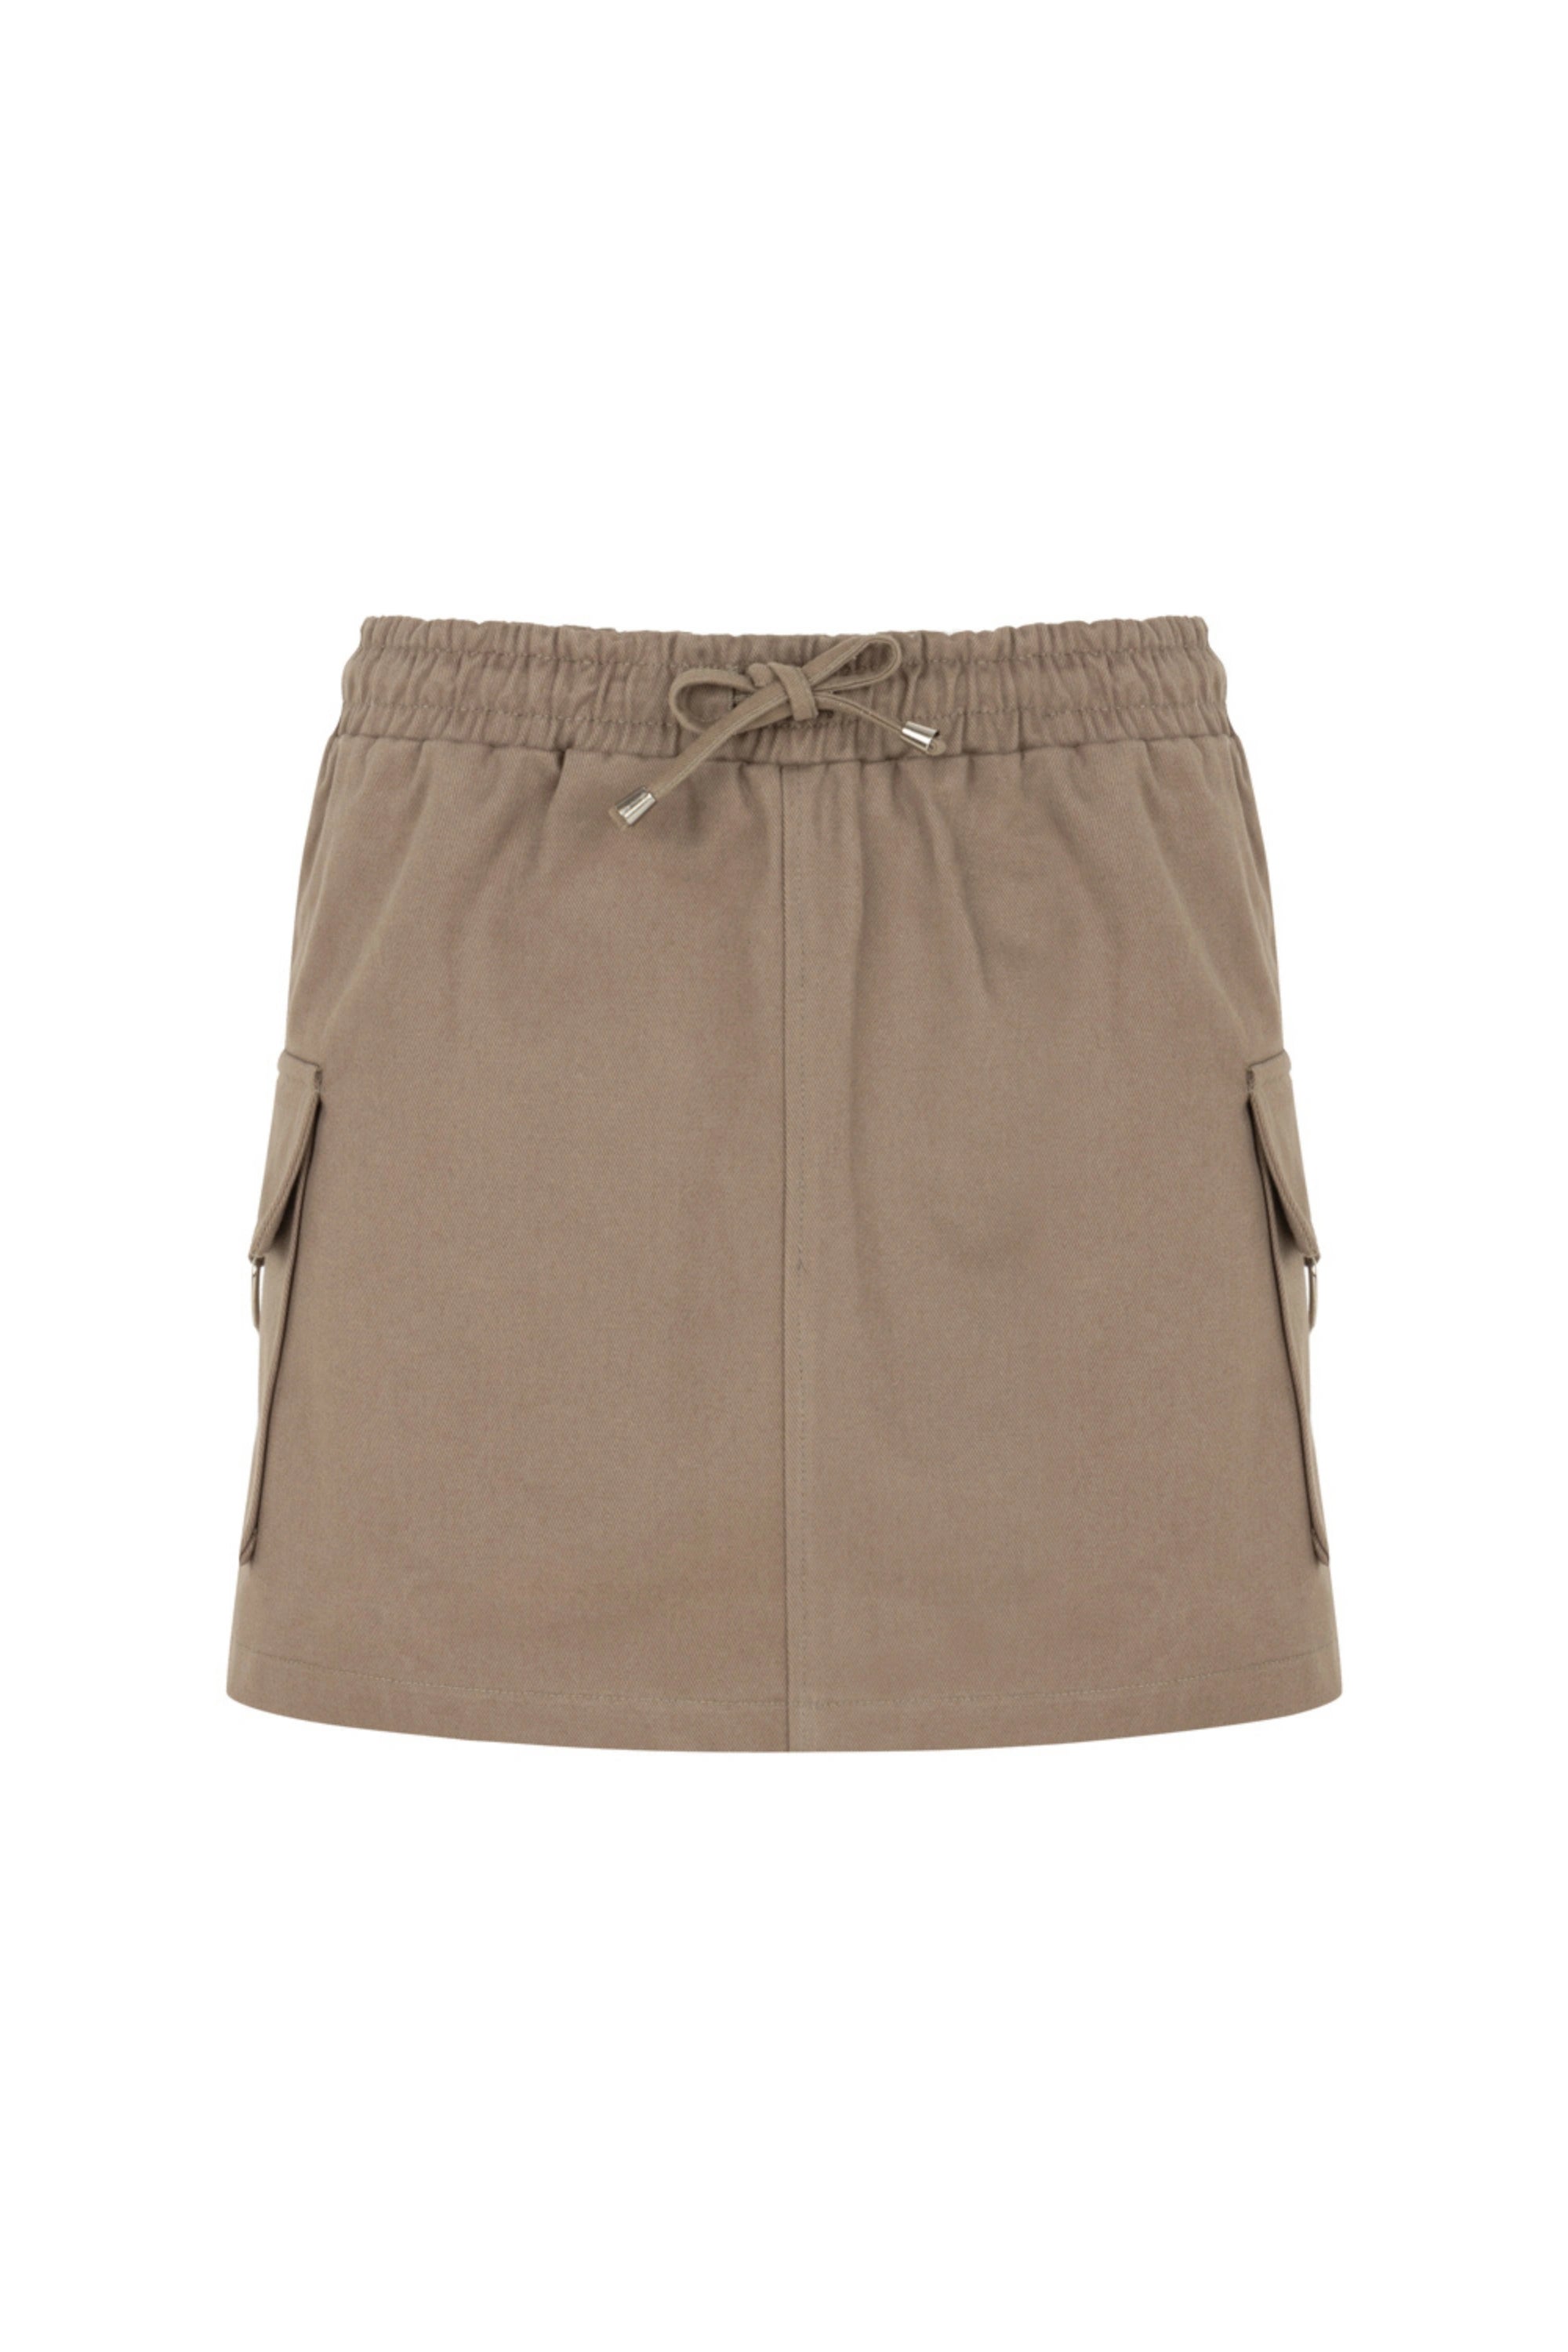 Nocturne Women's Neutrals Mini Skirt With Pockets In Brown